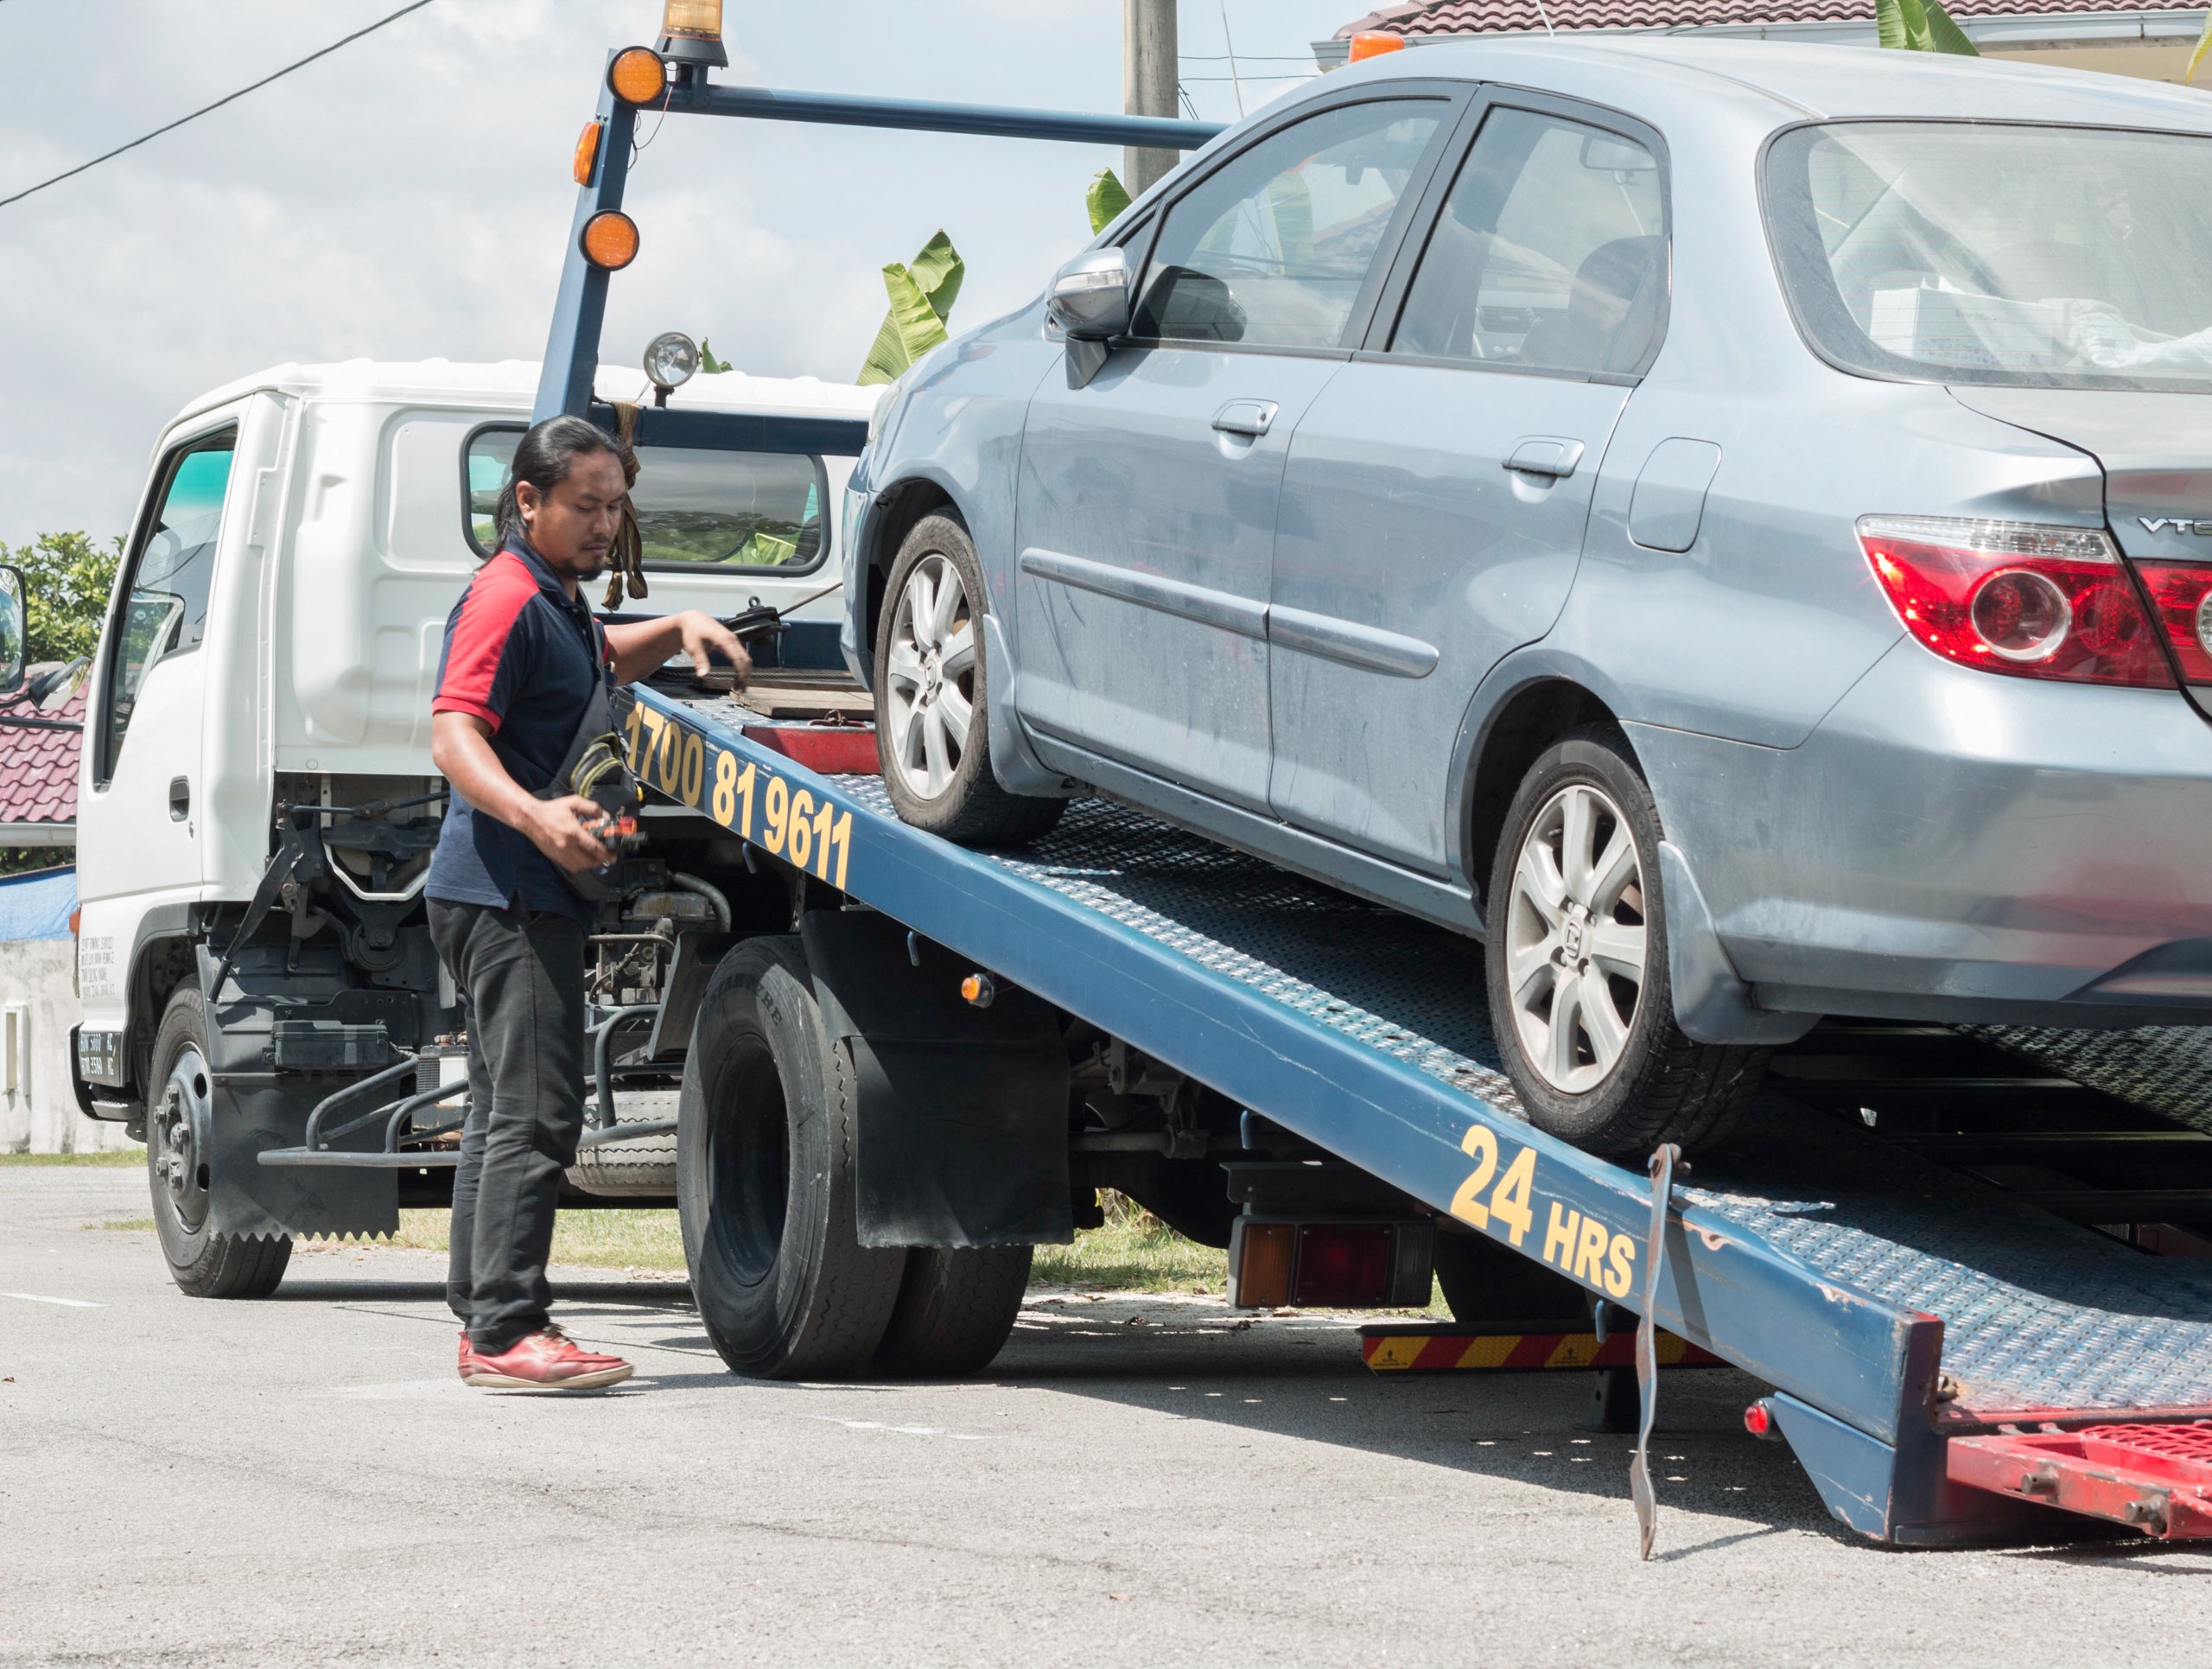 Convenient Car Removal For Busy Schedules